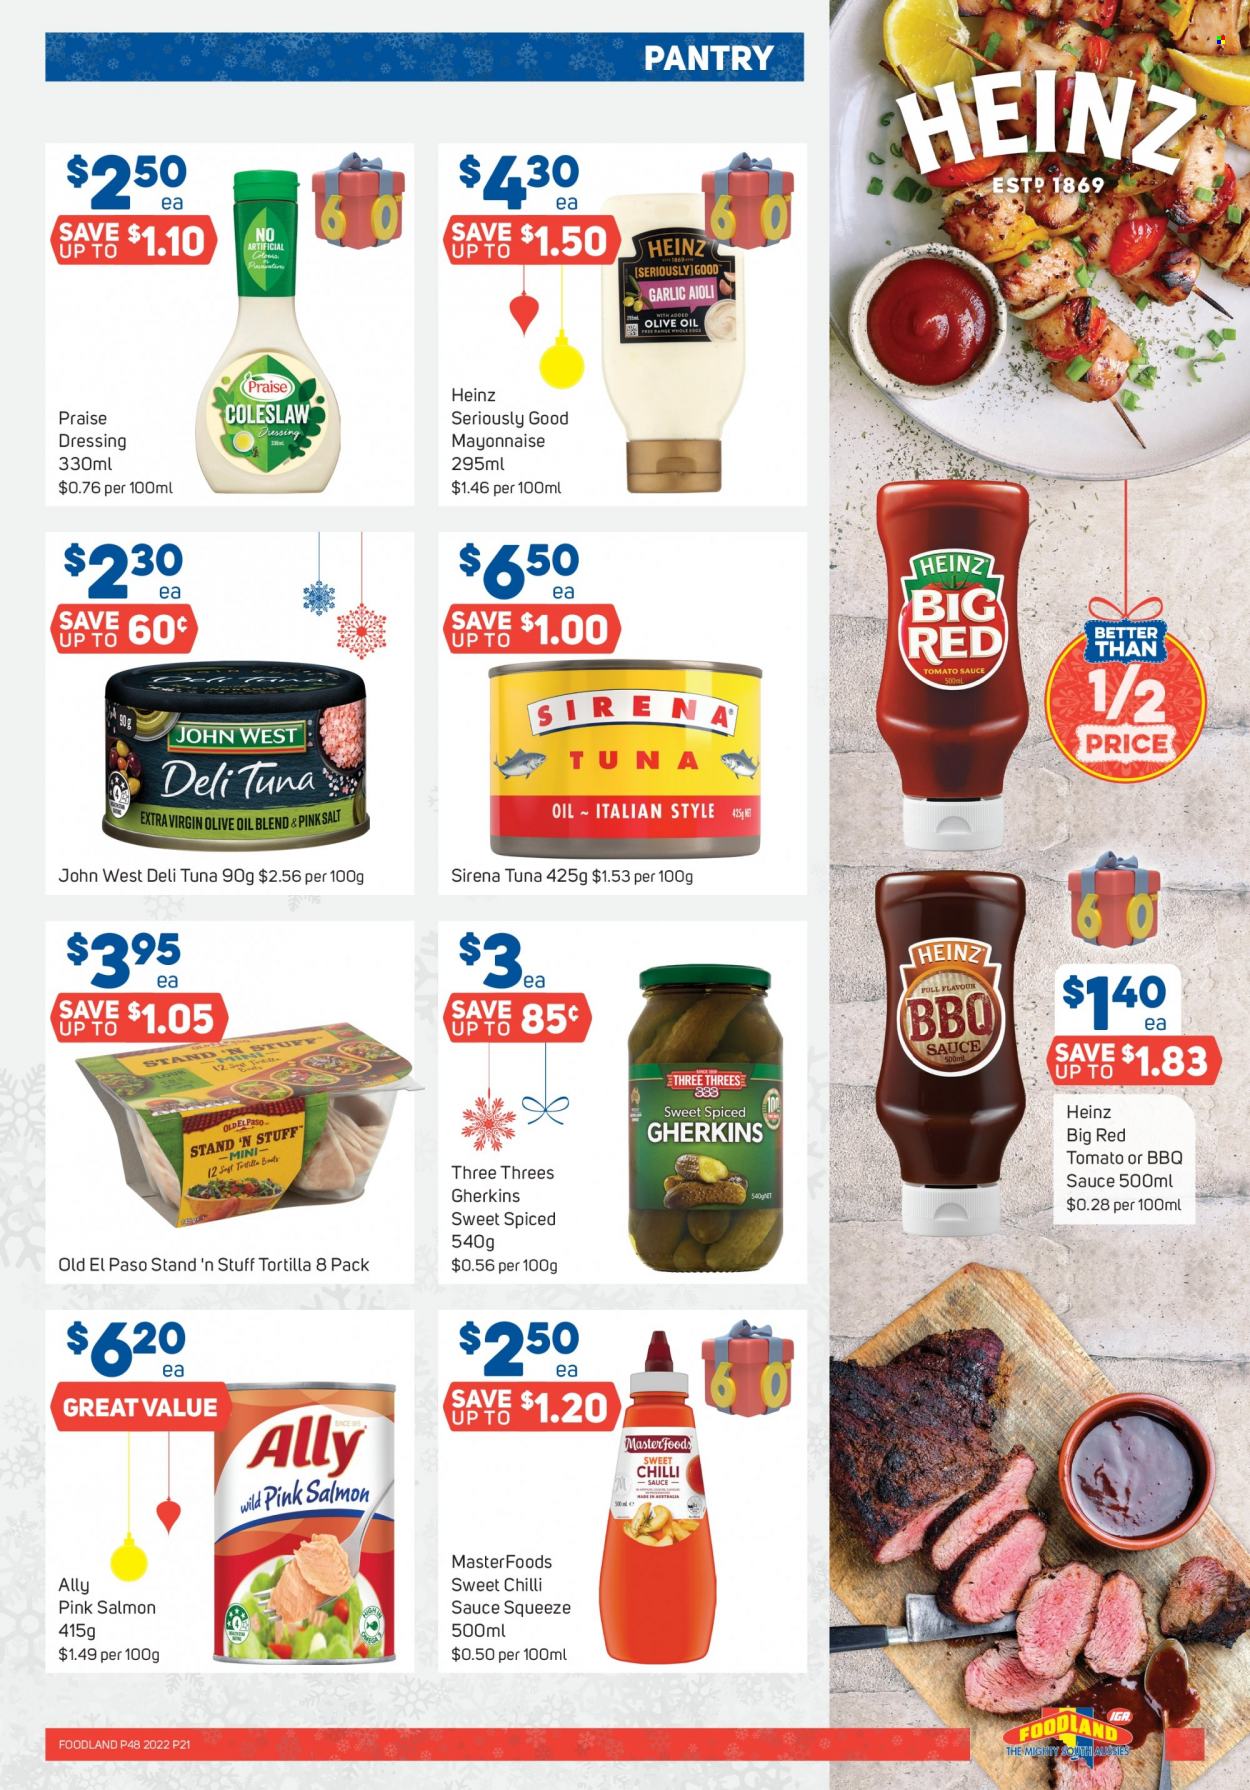 thumbnail - Foodland Catalogue - 30 Nov 2022 - 6 Dec 2022 - Sales products - tortillas, Old El Paso, coleslaw, salmon, tuna, sauce, mayonnaise, salt, tomato sauce, Heinz, Sirena Tuna, pickled gherkins, BBQ sauce, chilli sauce, coleslaw dressing, sweet chilli sauce, extra virgin olive oil, olive oil, oil. Page 21.